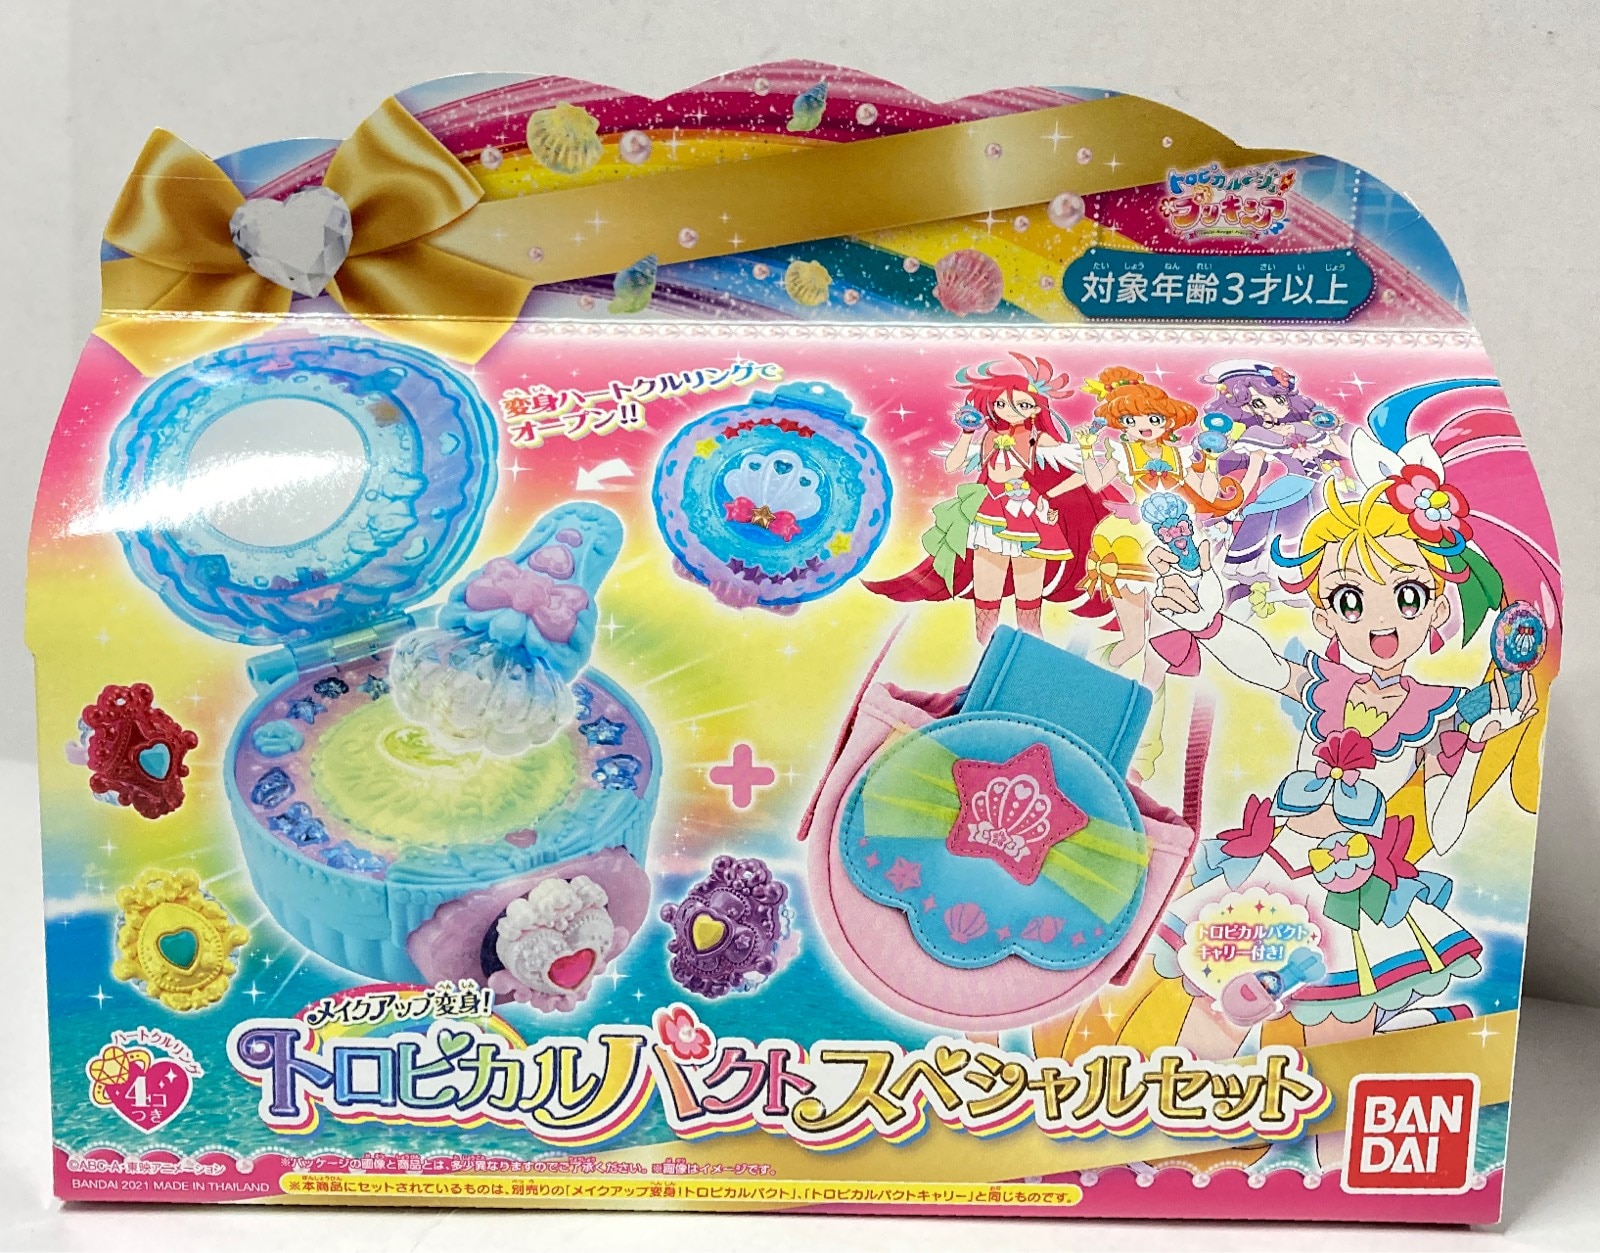 Tropical Rouge Precure Cure Makeup Tropical Pact Bandai Toy 2021 